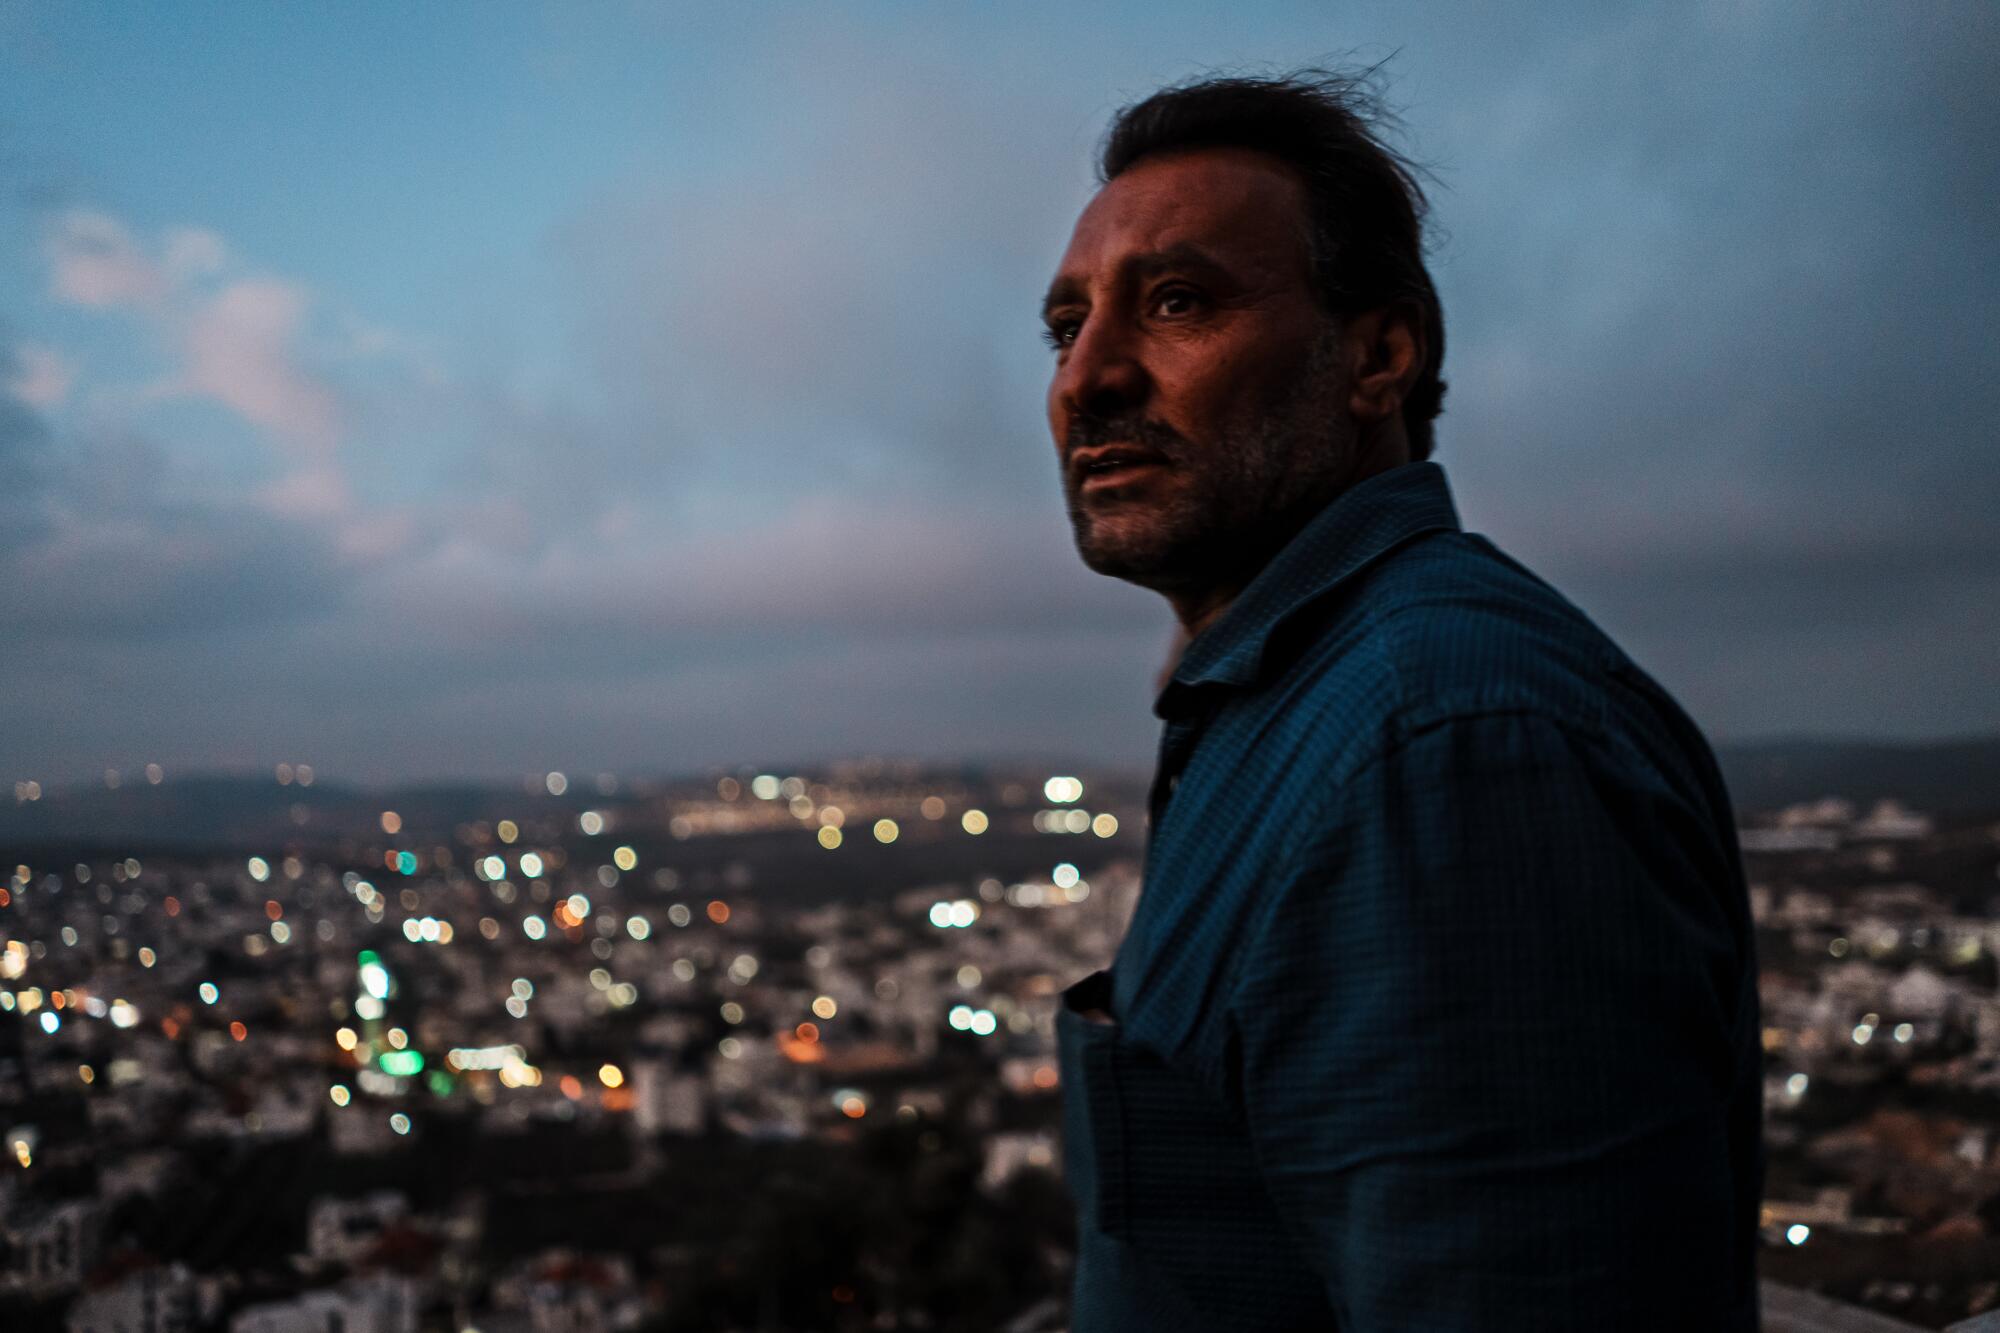 A man pictured from the chest up before nightfall, city lights visible below him in the background